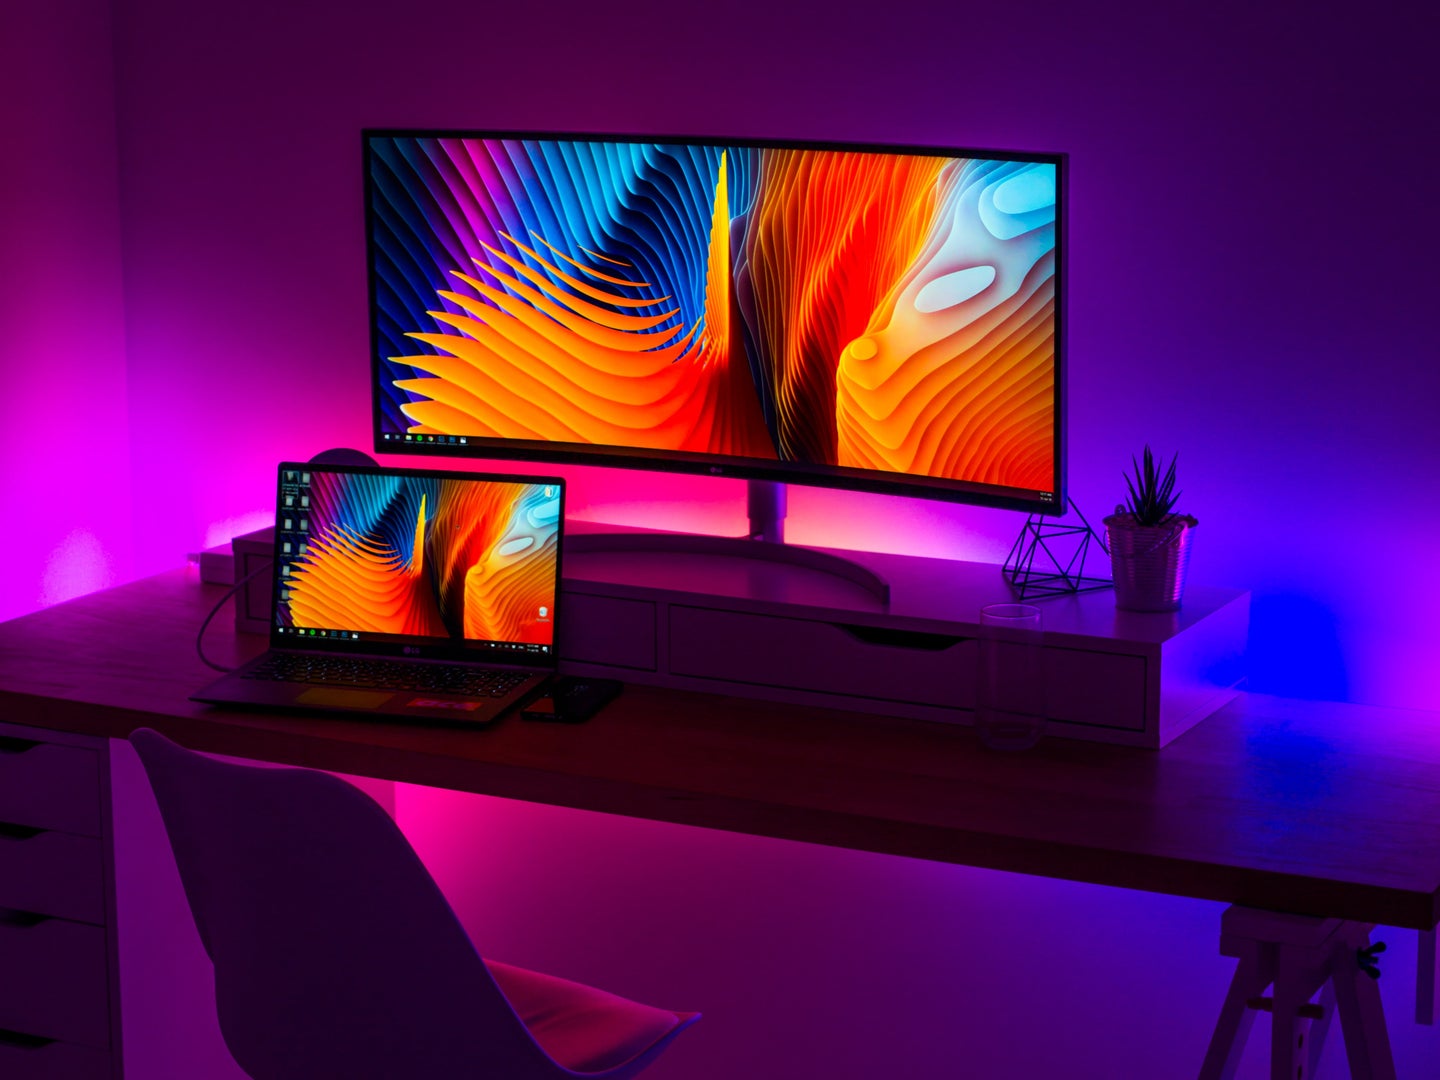 LED strip lights behind a computer desk, adding a purple glow to the room.